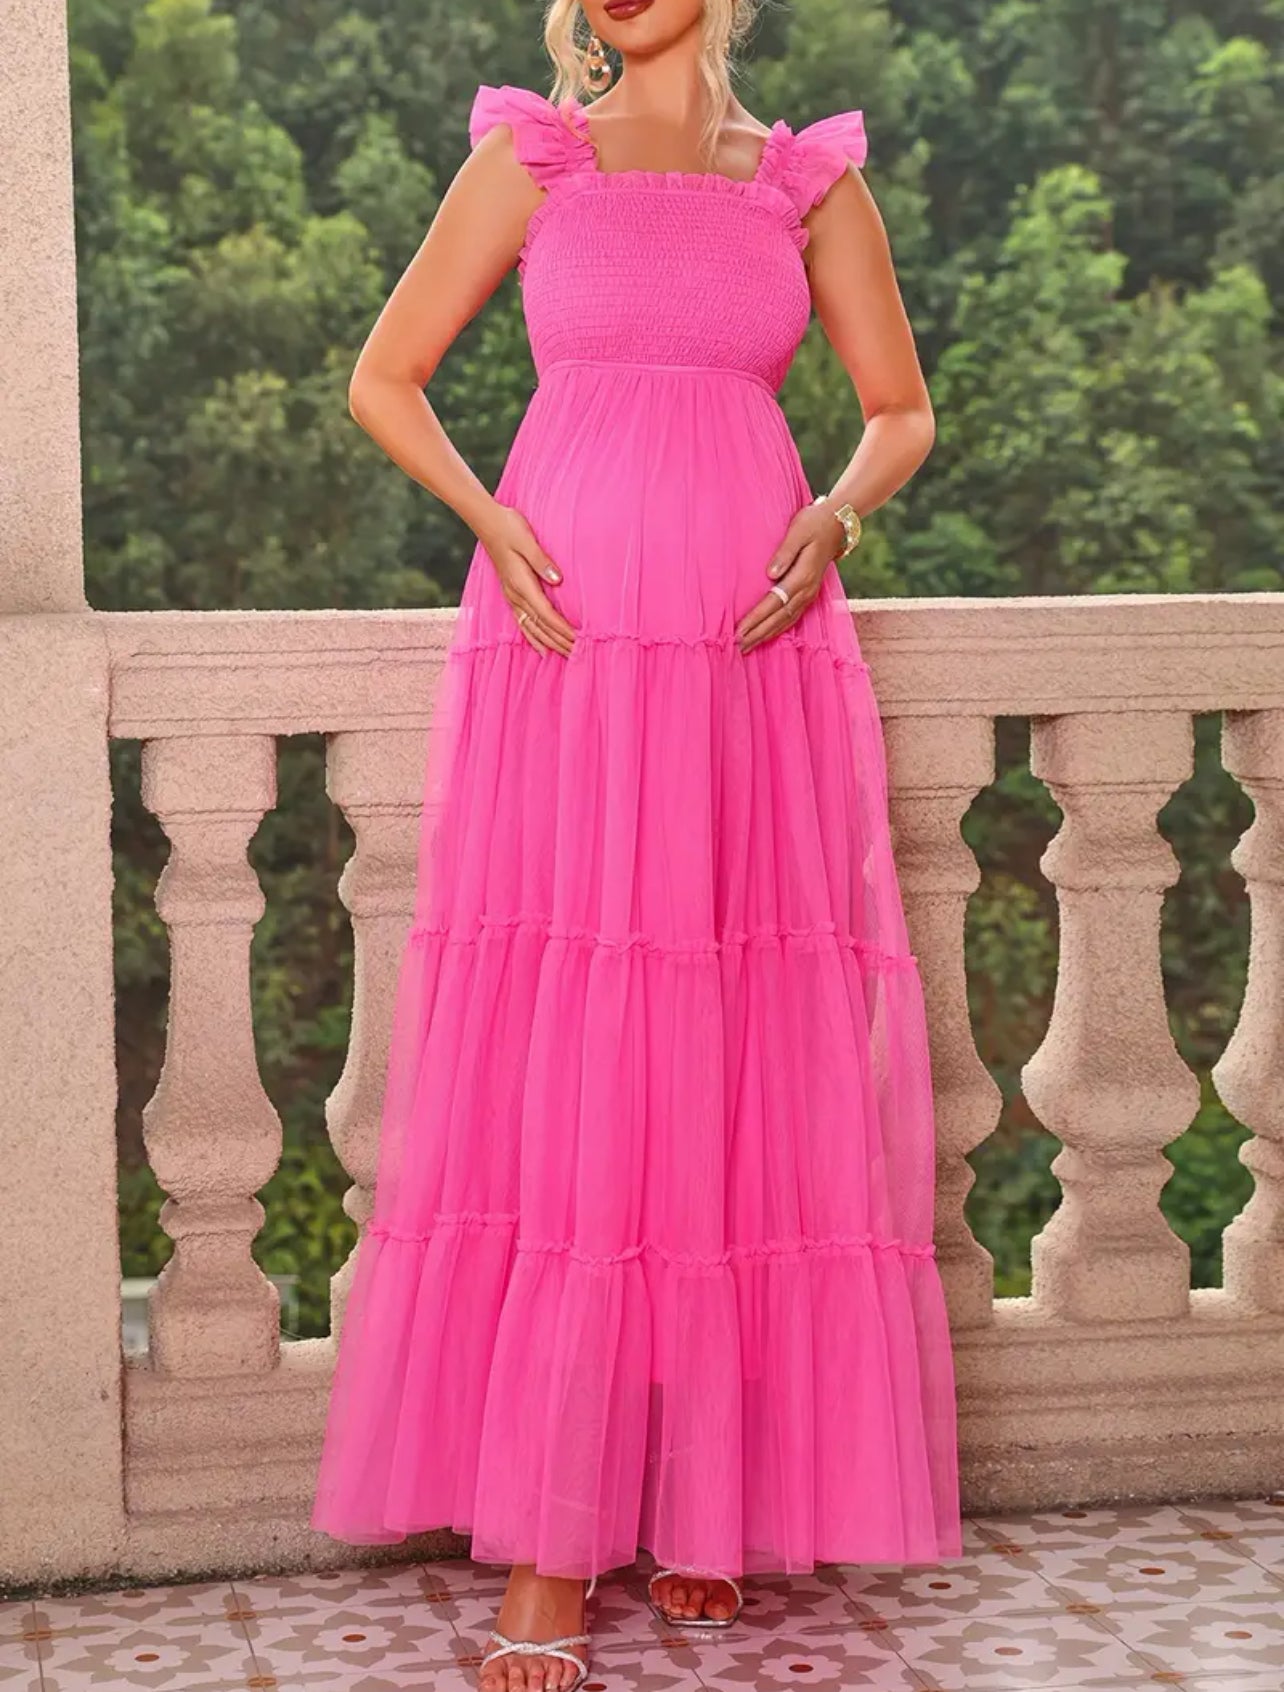 Pretty in Pink 🩷 Baby 🌙🌟 Bumps Maternity Collection Solid Hot Punk Flying Sleeve Dress For Baby-shower or Special Occasions